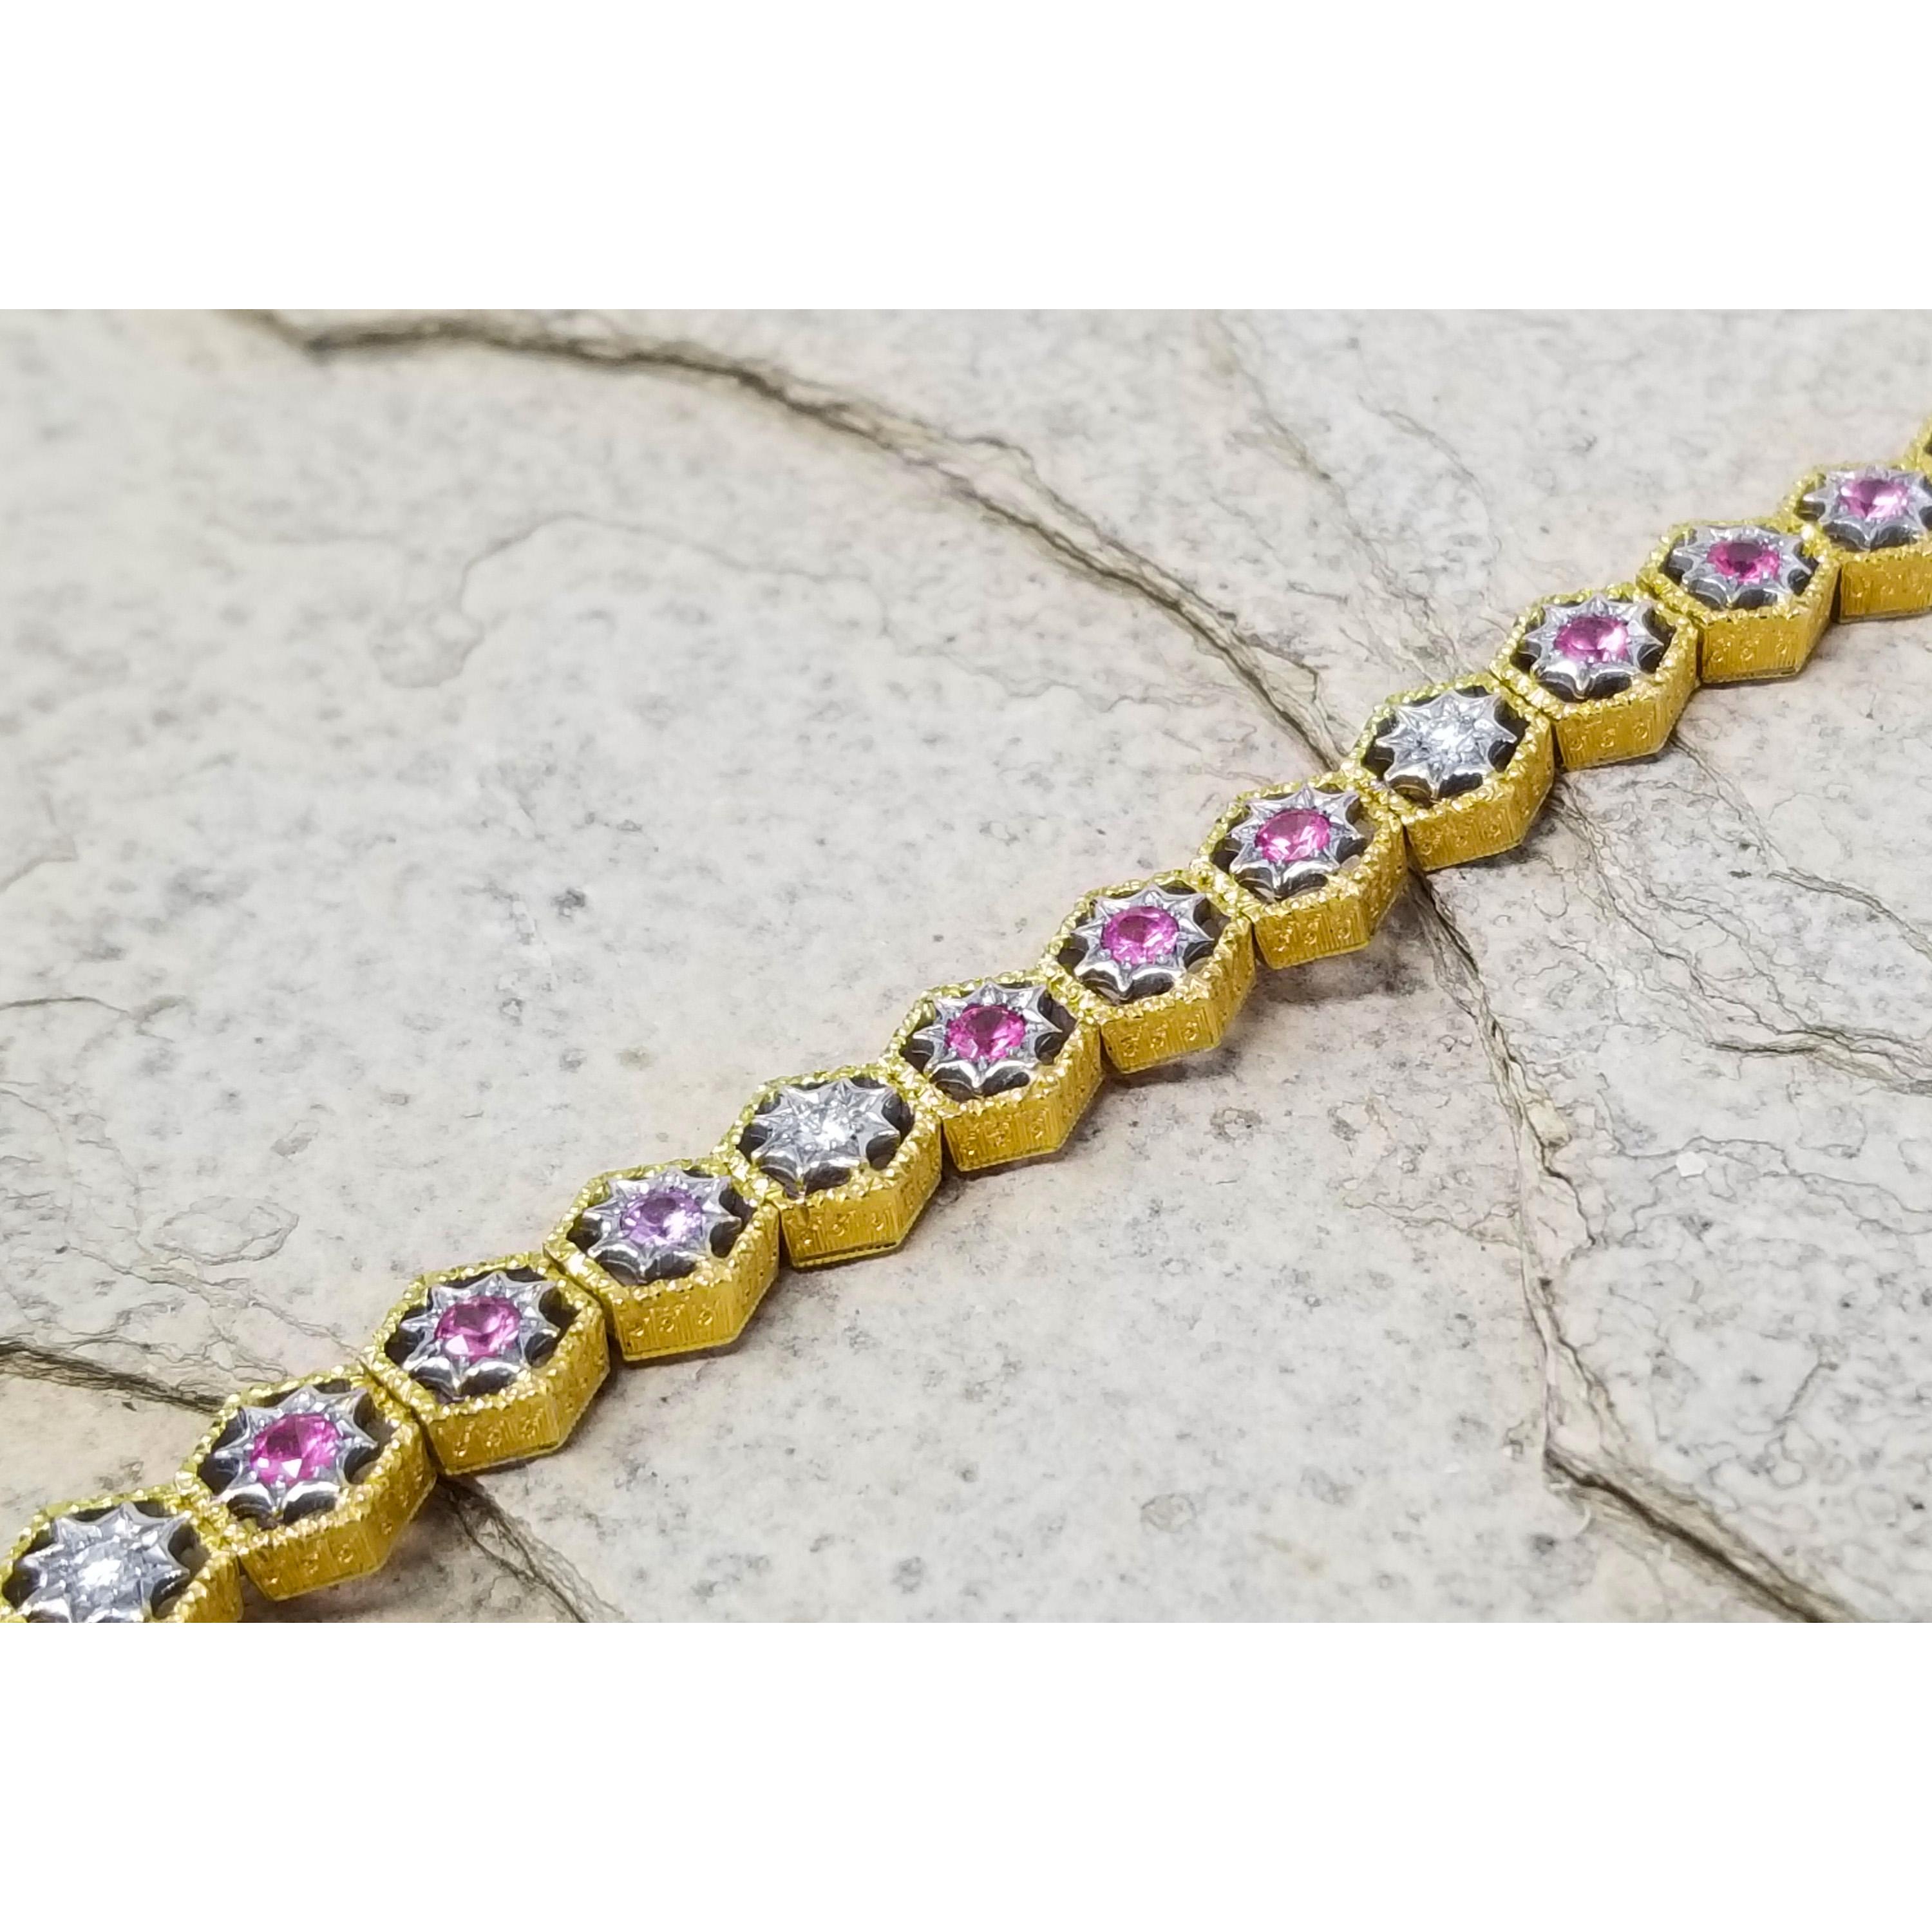 Mahenge Spinel, Diamond and 18kt Bracelet Made in Italy by Cynthia Scott Jewelry In New Condition For Sale In Logan, UT